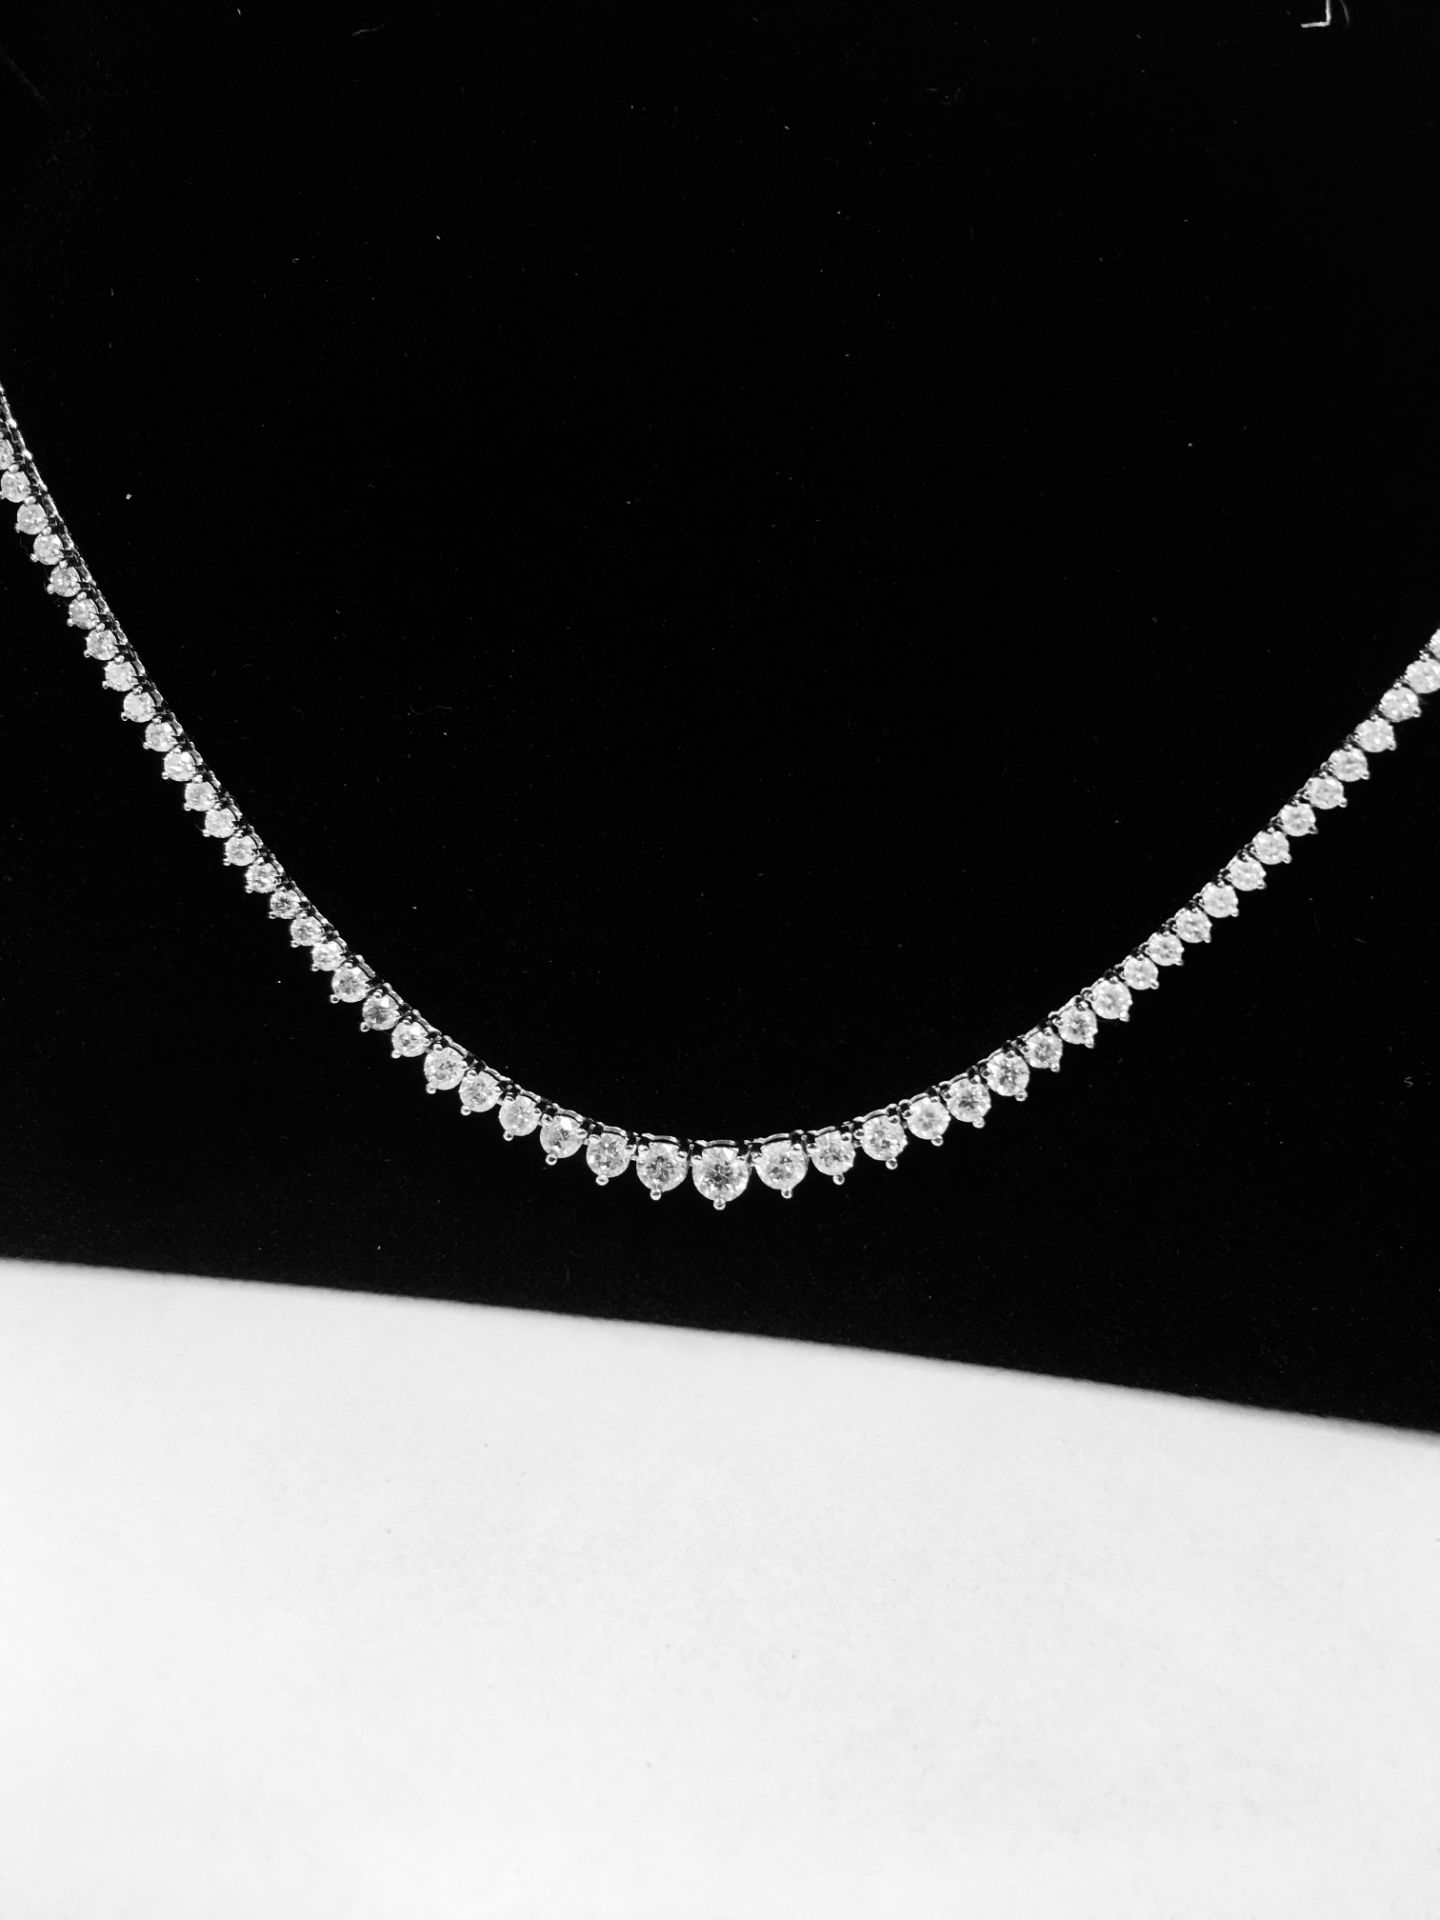 6.50ct Diamond tennis style necklace. 3 claw setting. Graduated diamonds, I colour, Si2 clarity - Image 4 of 6